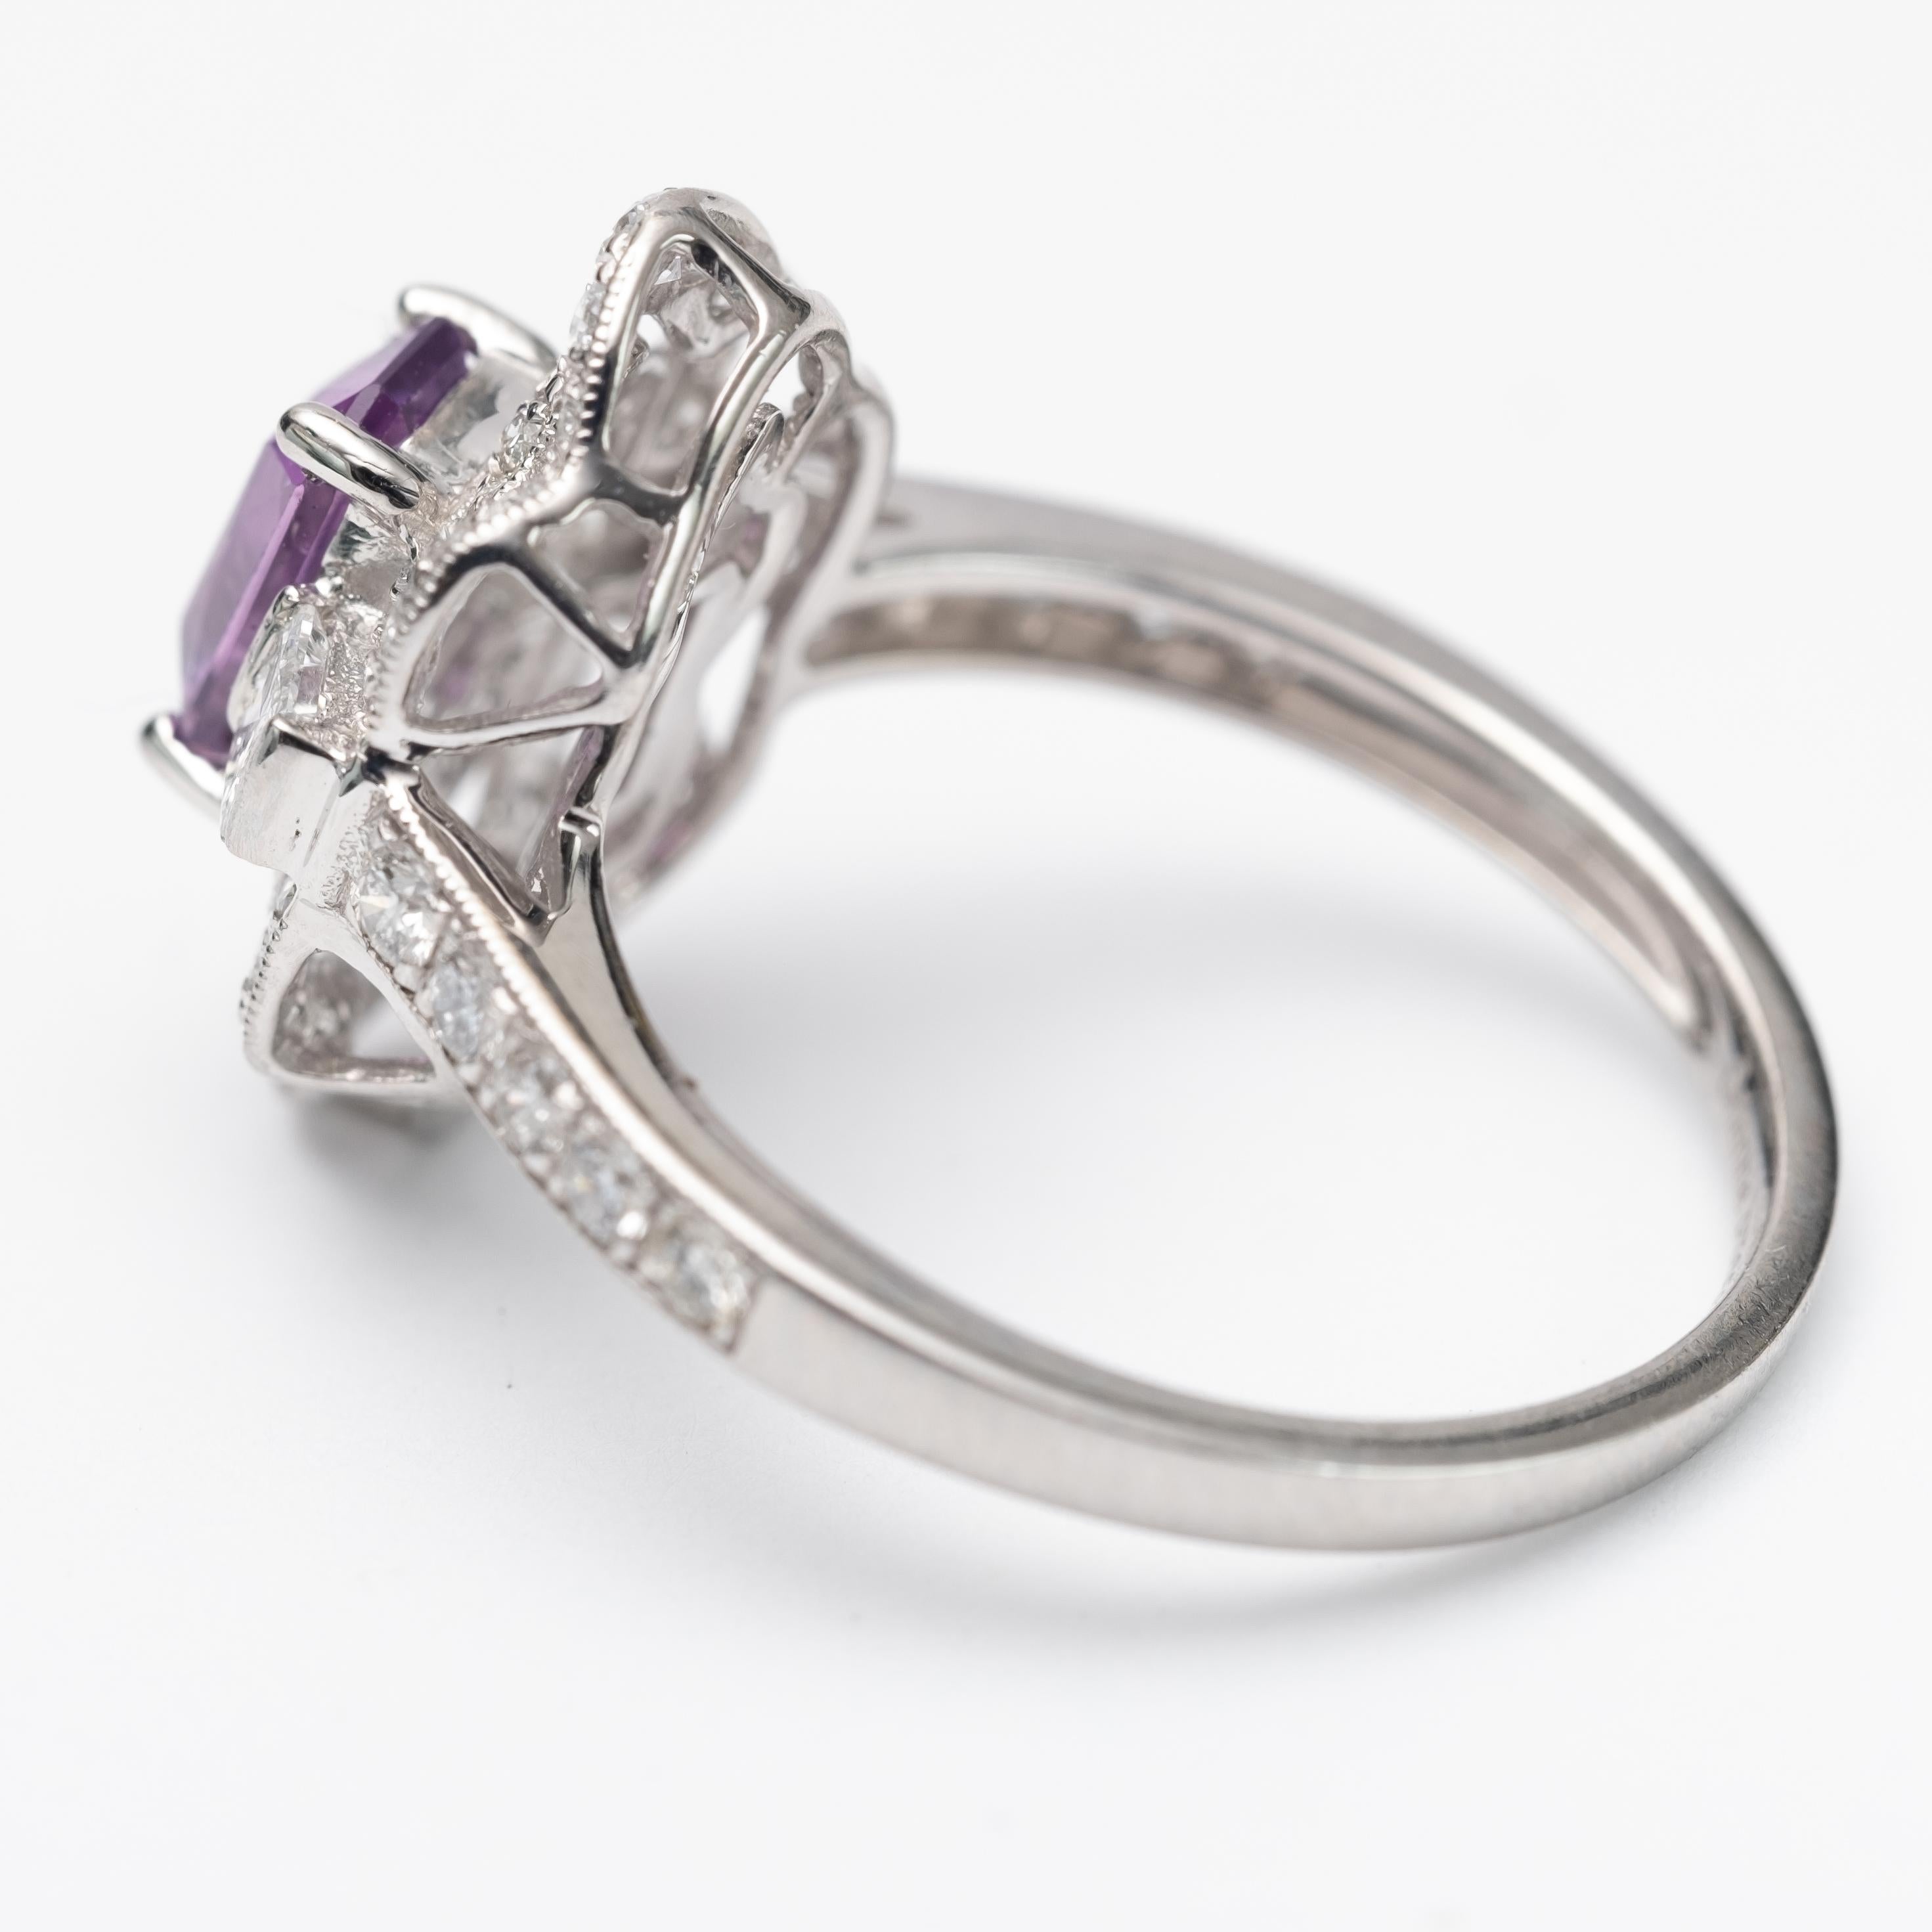 Tested platinum ladies cast pink purple sapphire & diamond ring. New Condition. The feathered sapphire is set within a tiered diamond bezel, supported by a ribbed under gallery and diamond set shoulders, completed by a combined one & one half